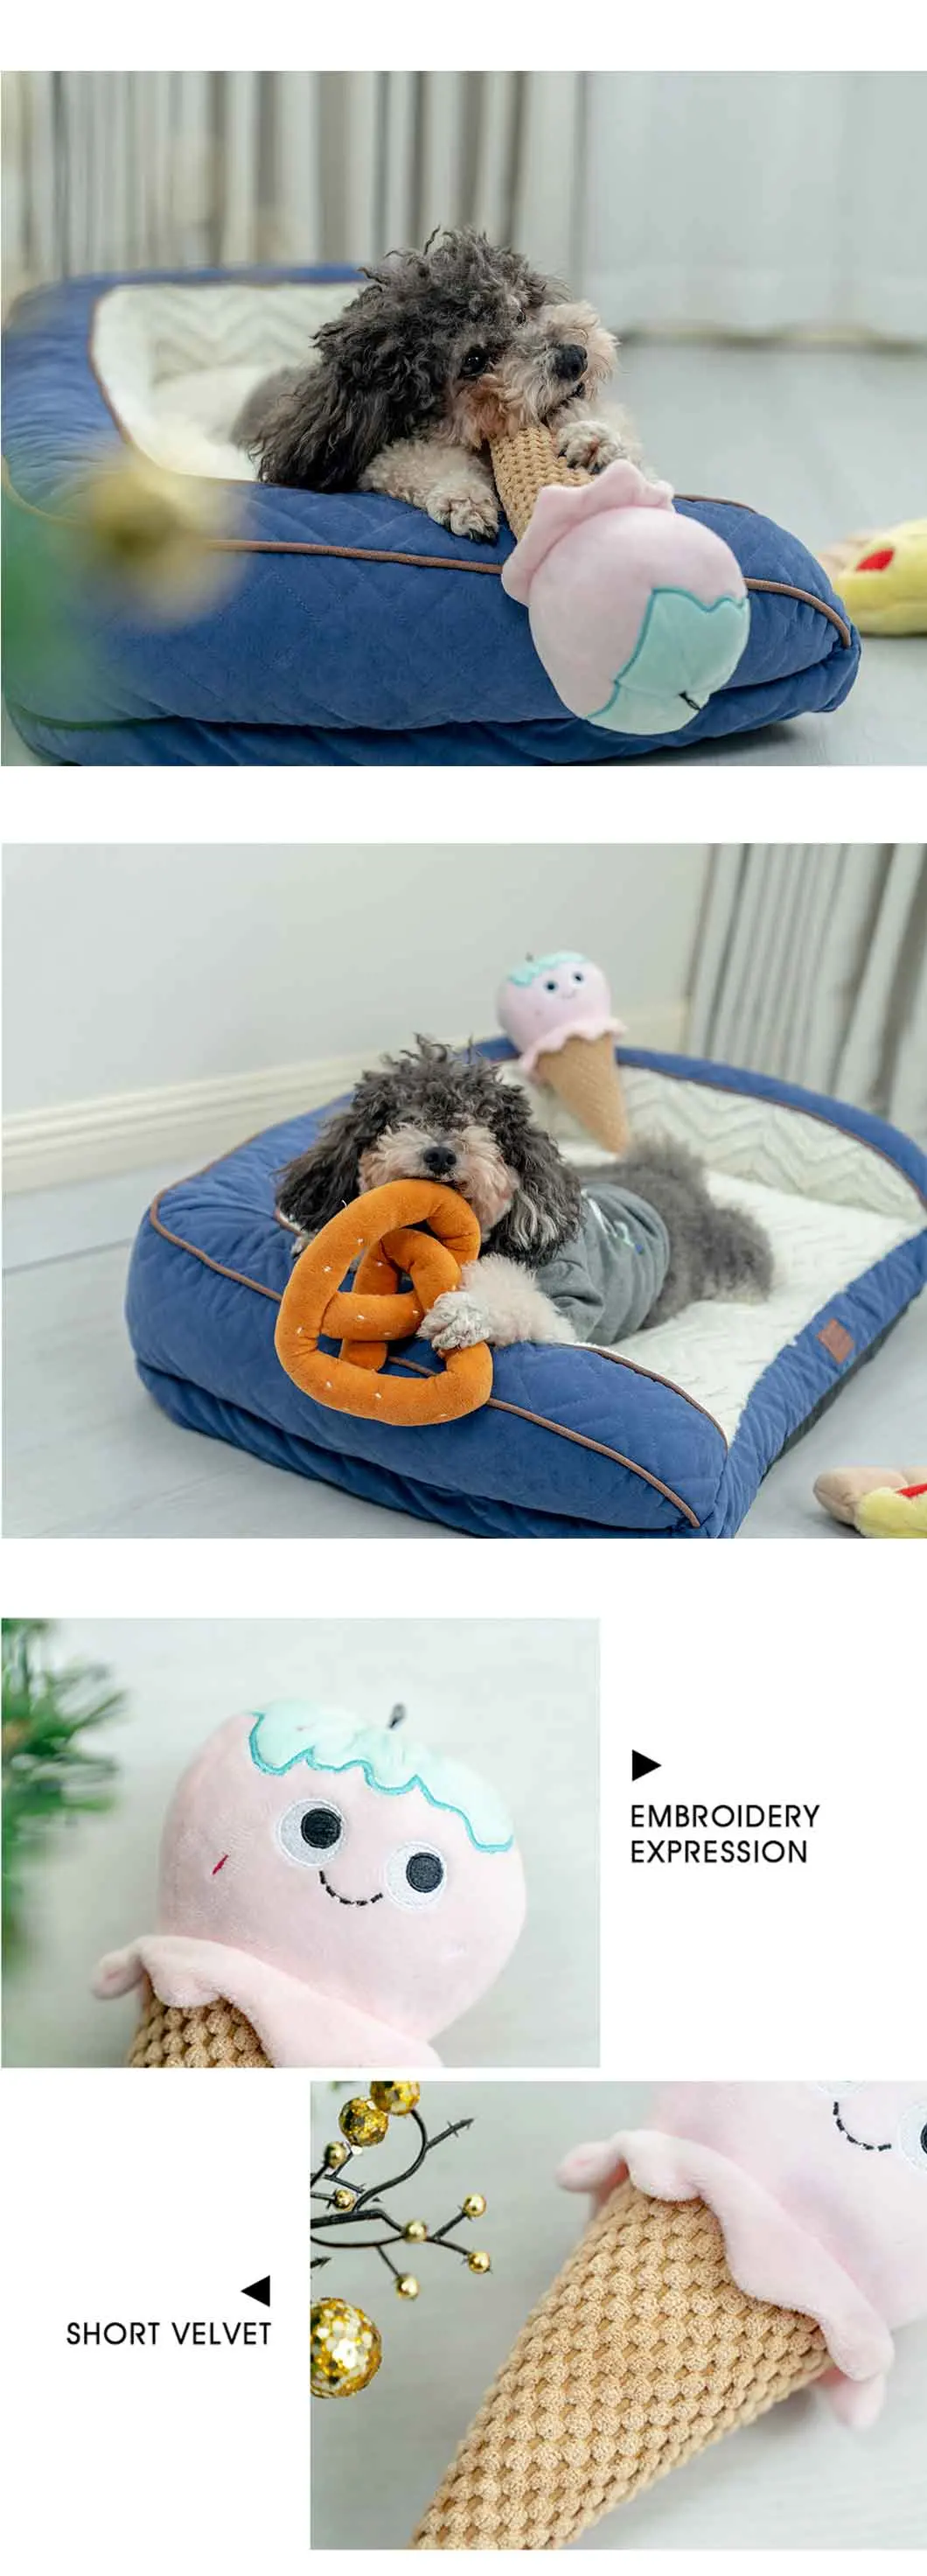 Rena Pet Ice Crean Frites Croissant Sunflower Fun Character Squeaky Throw and Fetch Dog Plush Toys